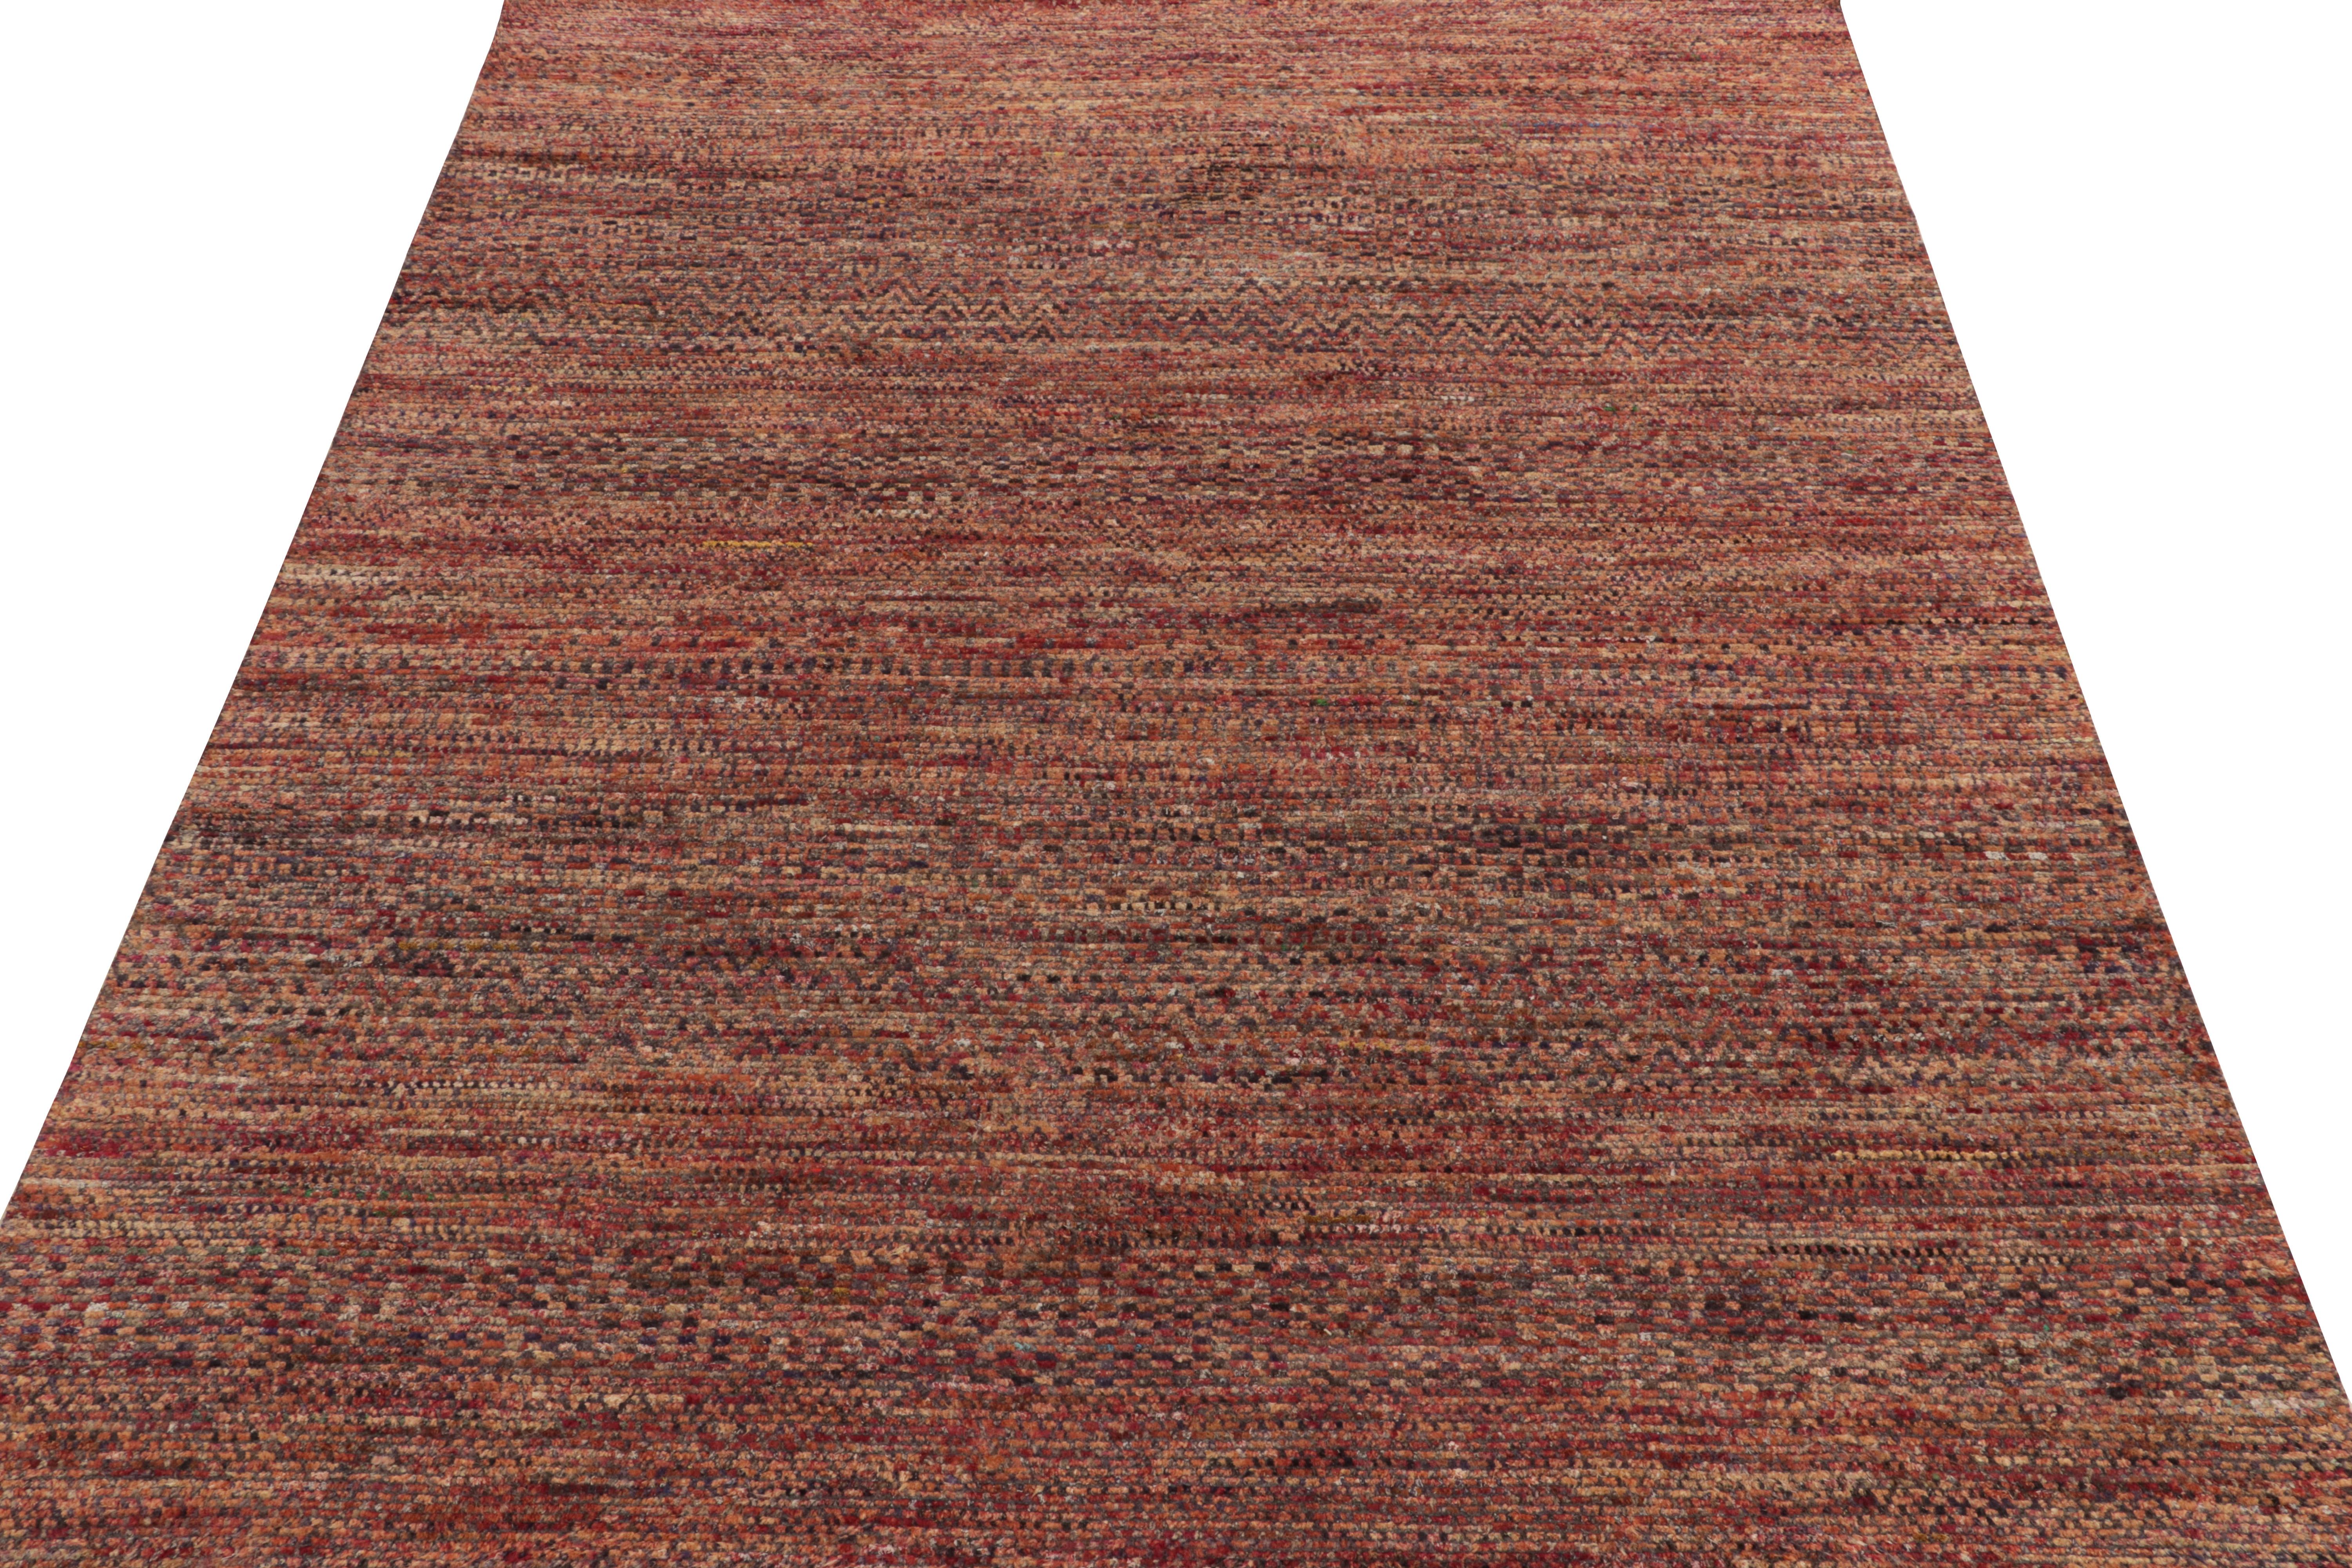 Hand-Knotted Rug & Kilim’s Modern Rug in a Red & Orange-Brown Striae, Geometric Patterns For Sale